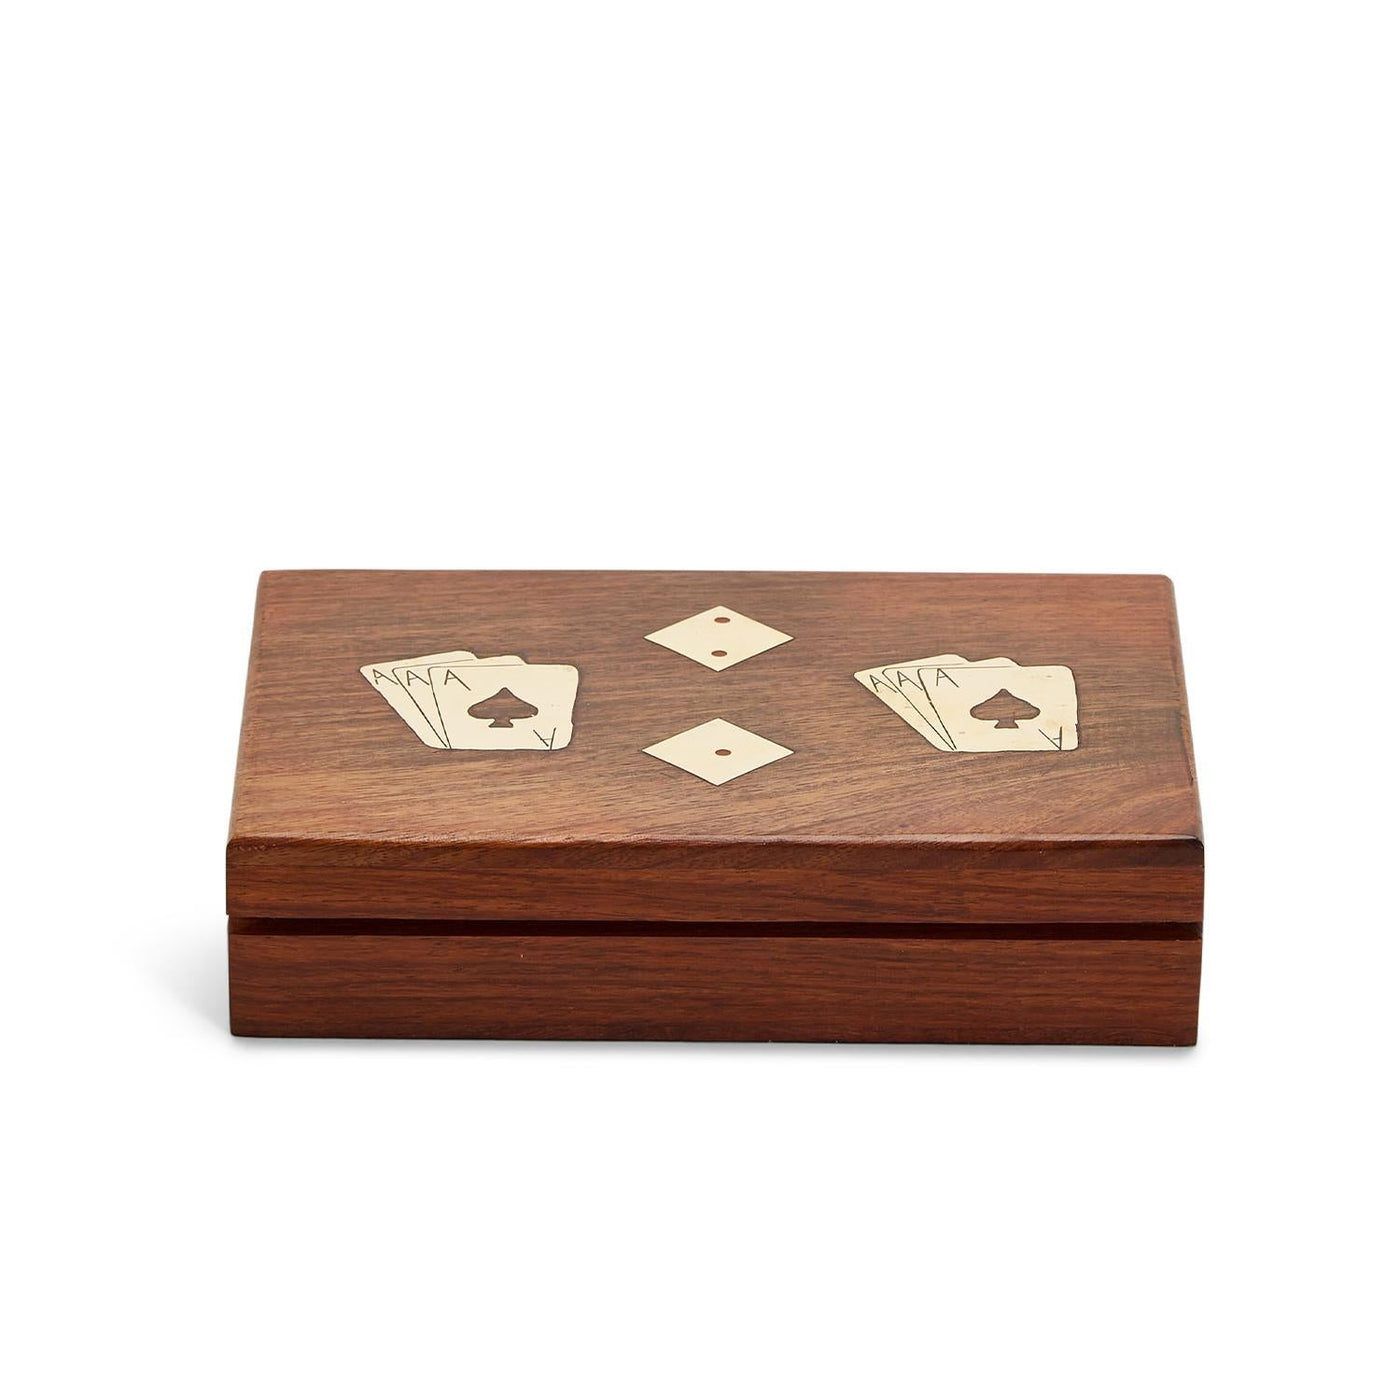 Wood Crafted Playing Card/Dice Set